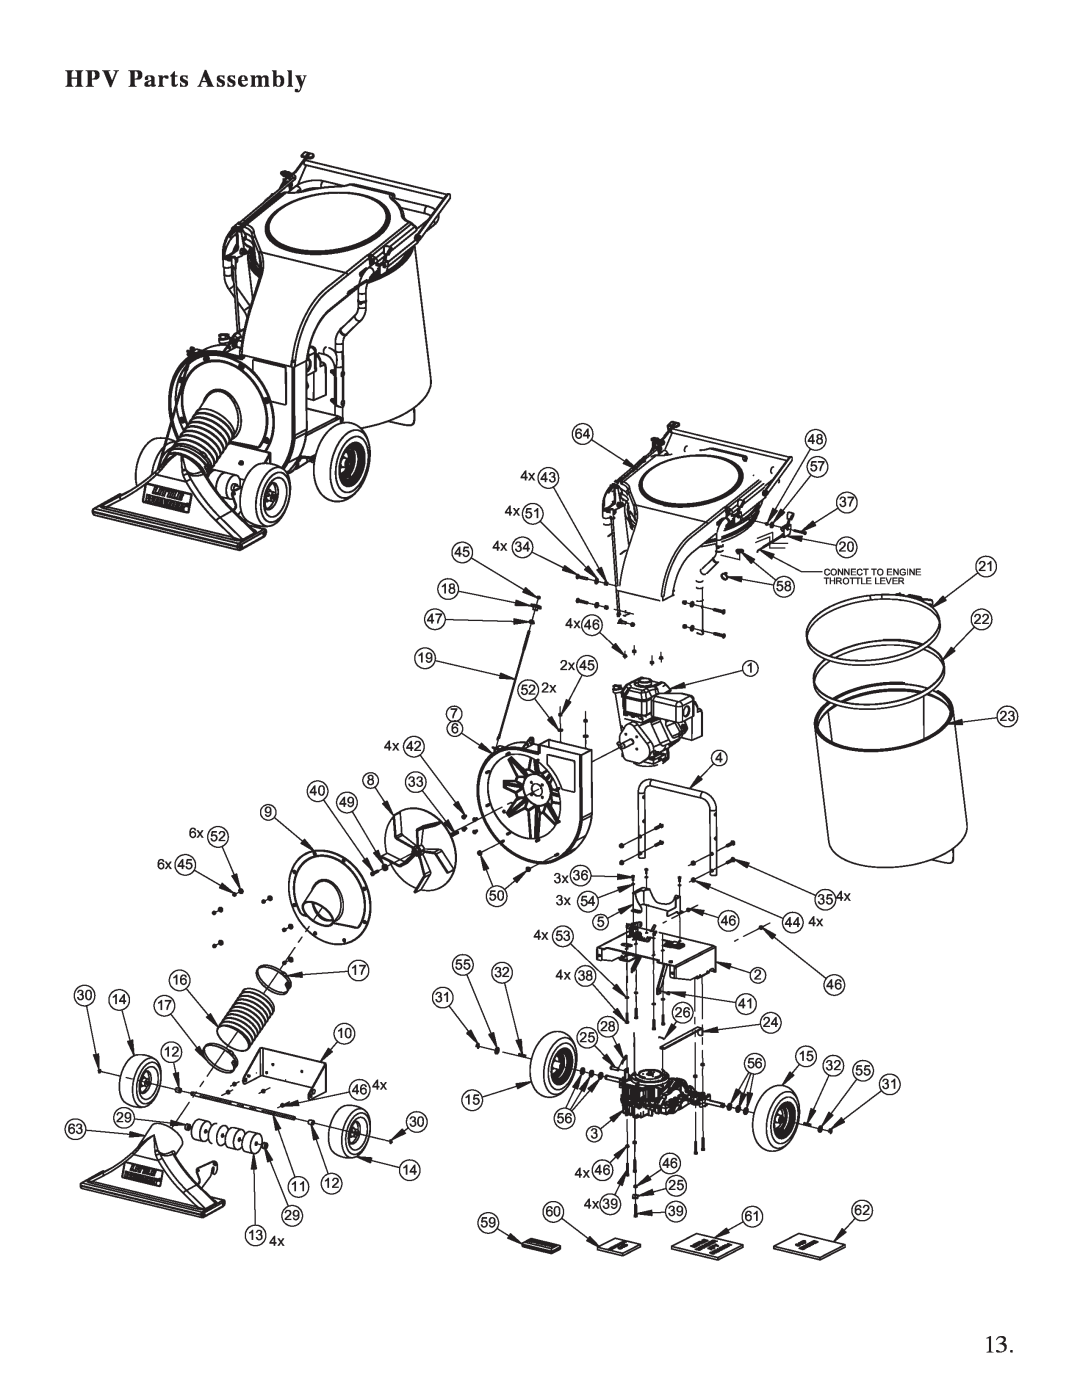 Briggs & Stratton 5621, 5631 manual HPV Parts Assembly, 4x 4x 4x 4x 2x, 6x 6x, CONNECT TO ENGINE 58 THROTTLE LEVER 